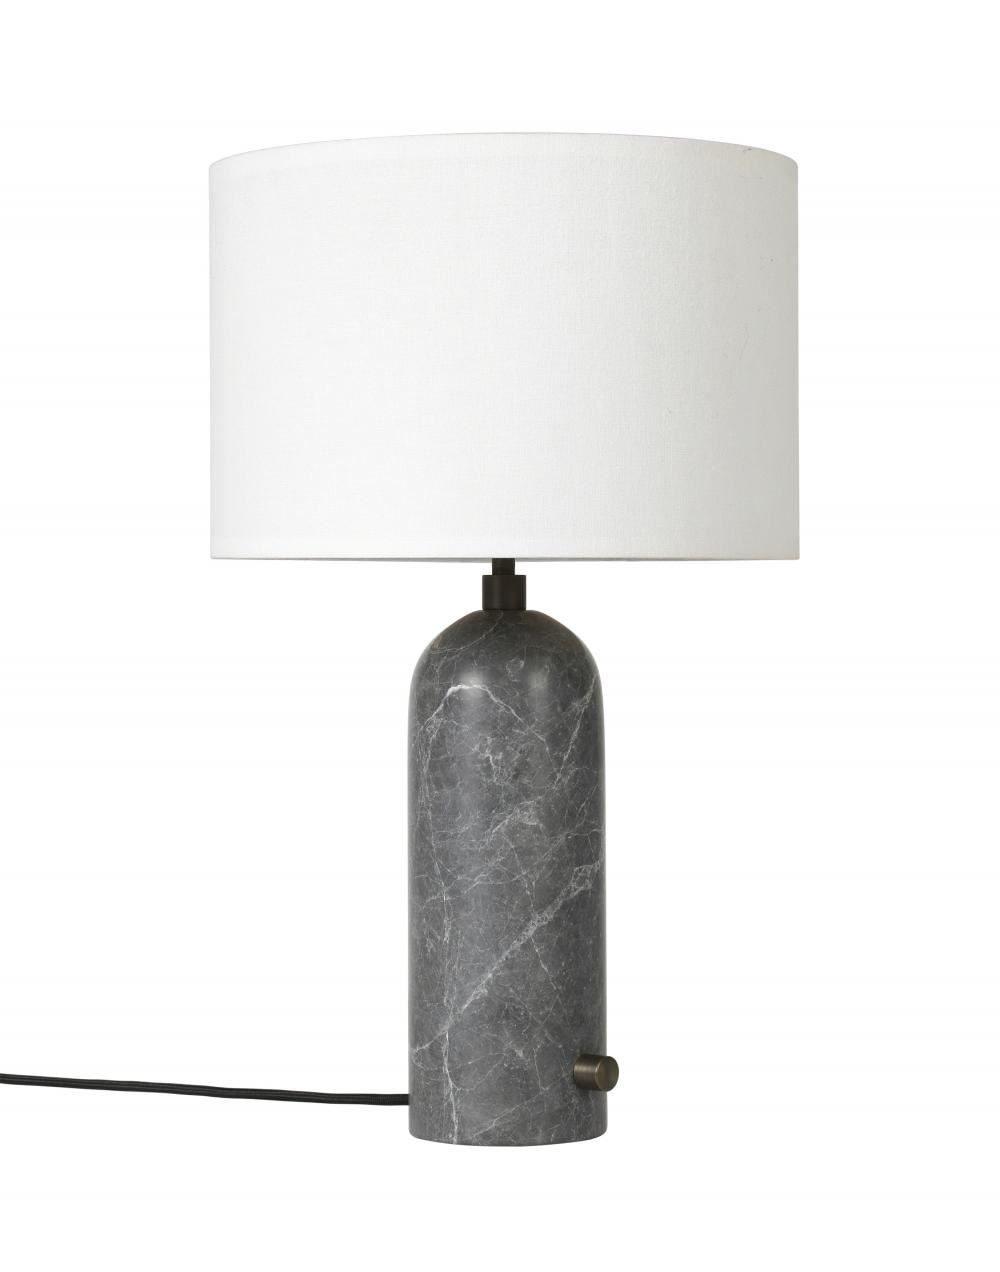 Gravity Table Lamp Small Grey Marble White Shade